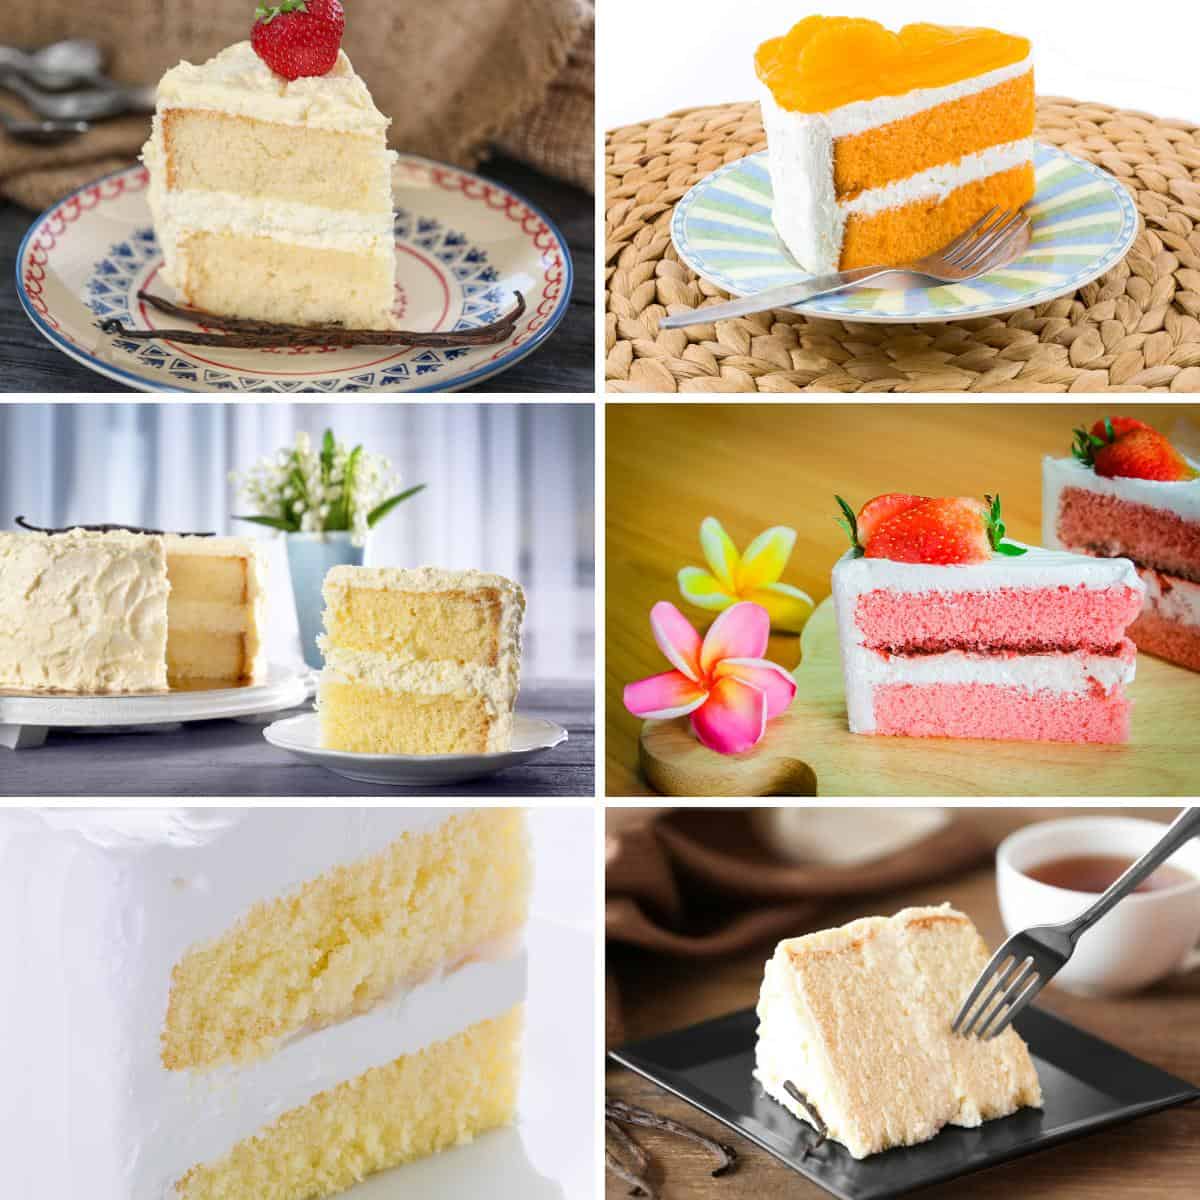 Six flavors from one cake each on a plate.